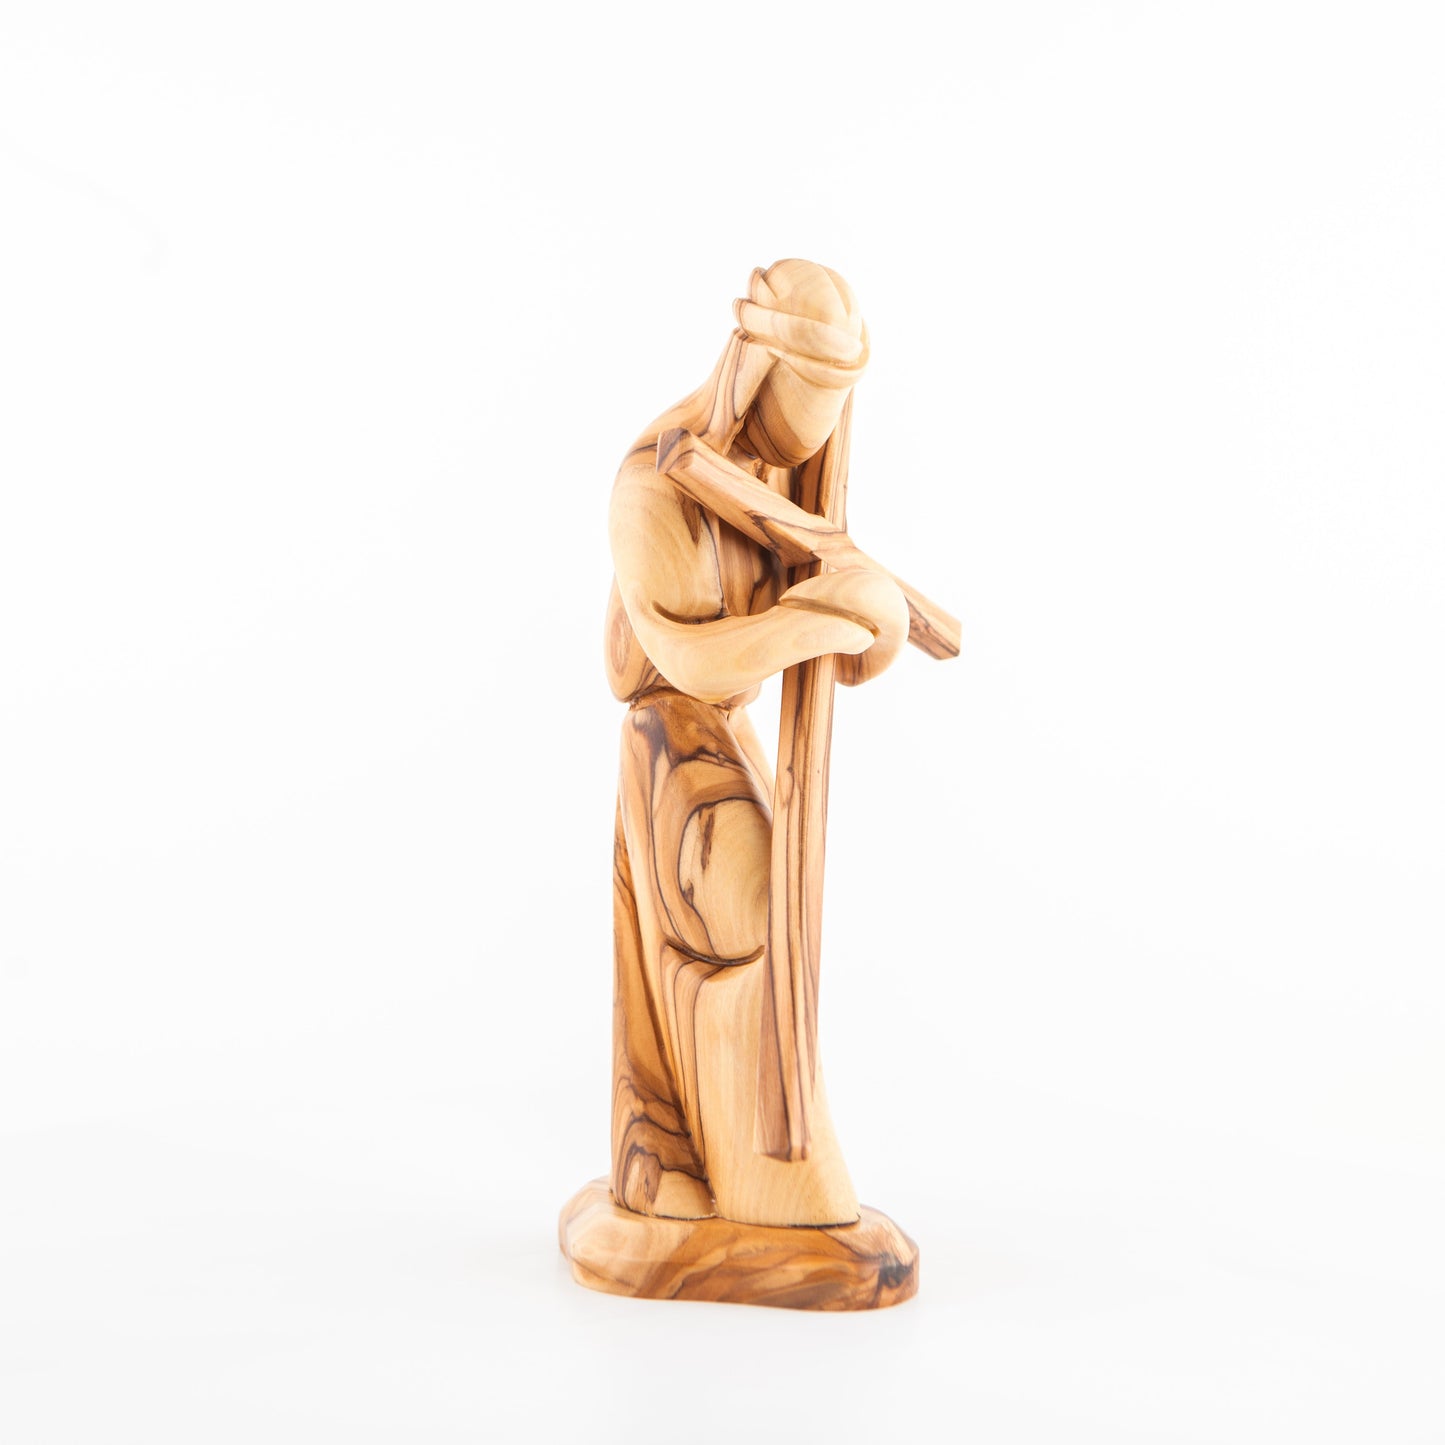 Jesus Christ "Holding Cross", 9.1" Carving in Olive Wood from Holy Land